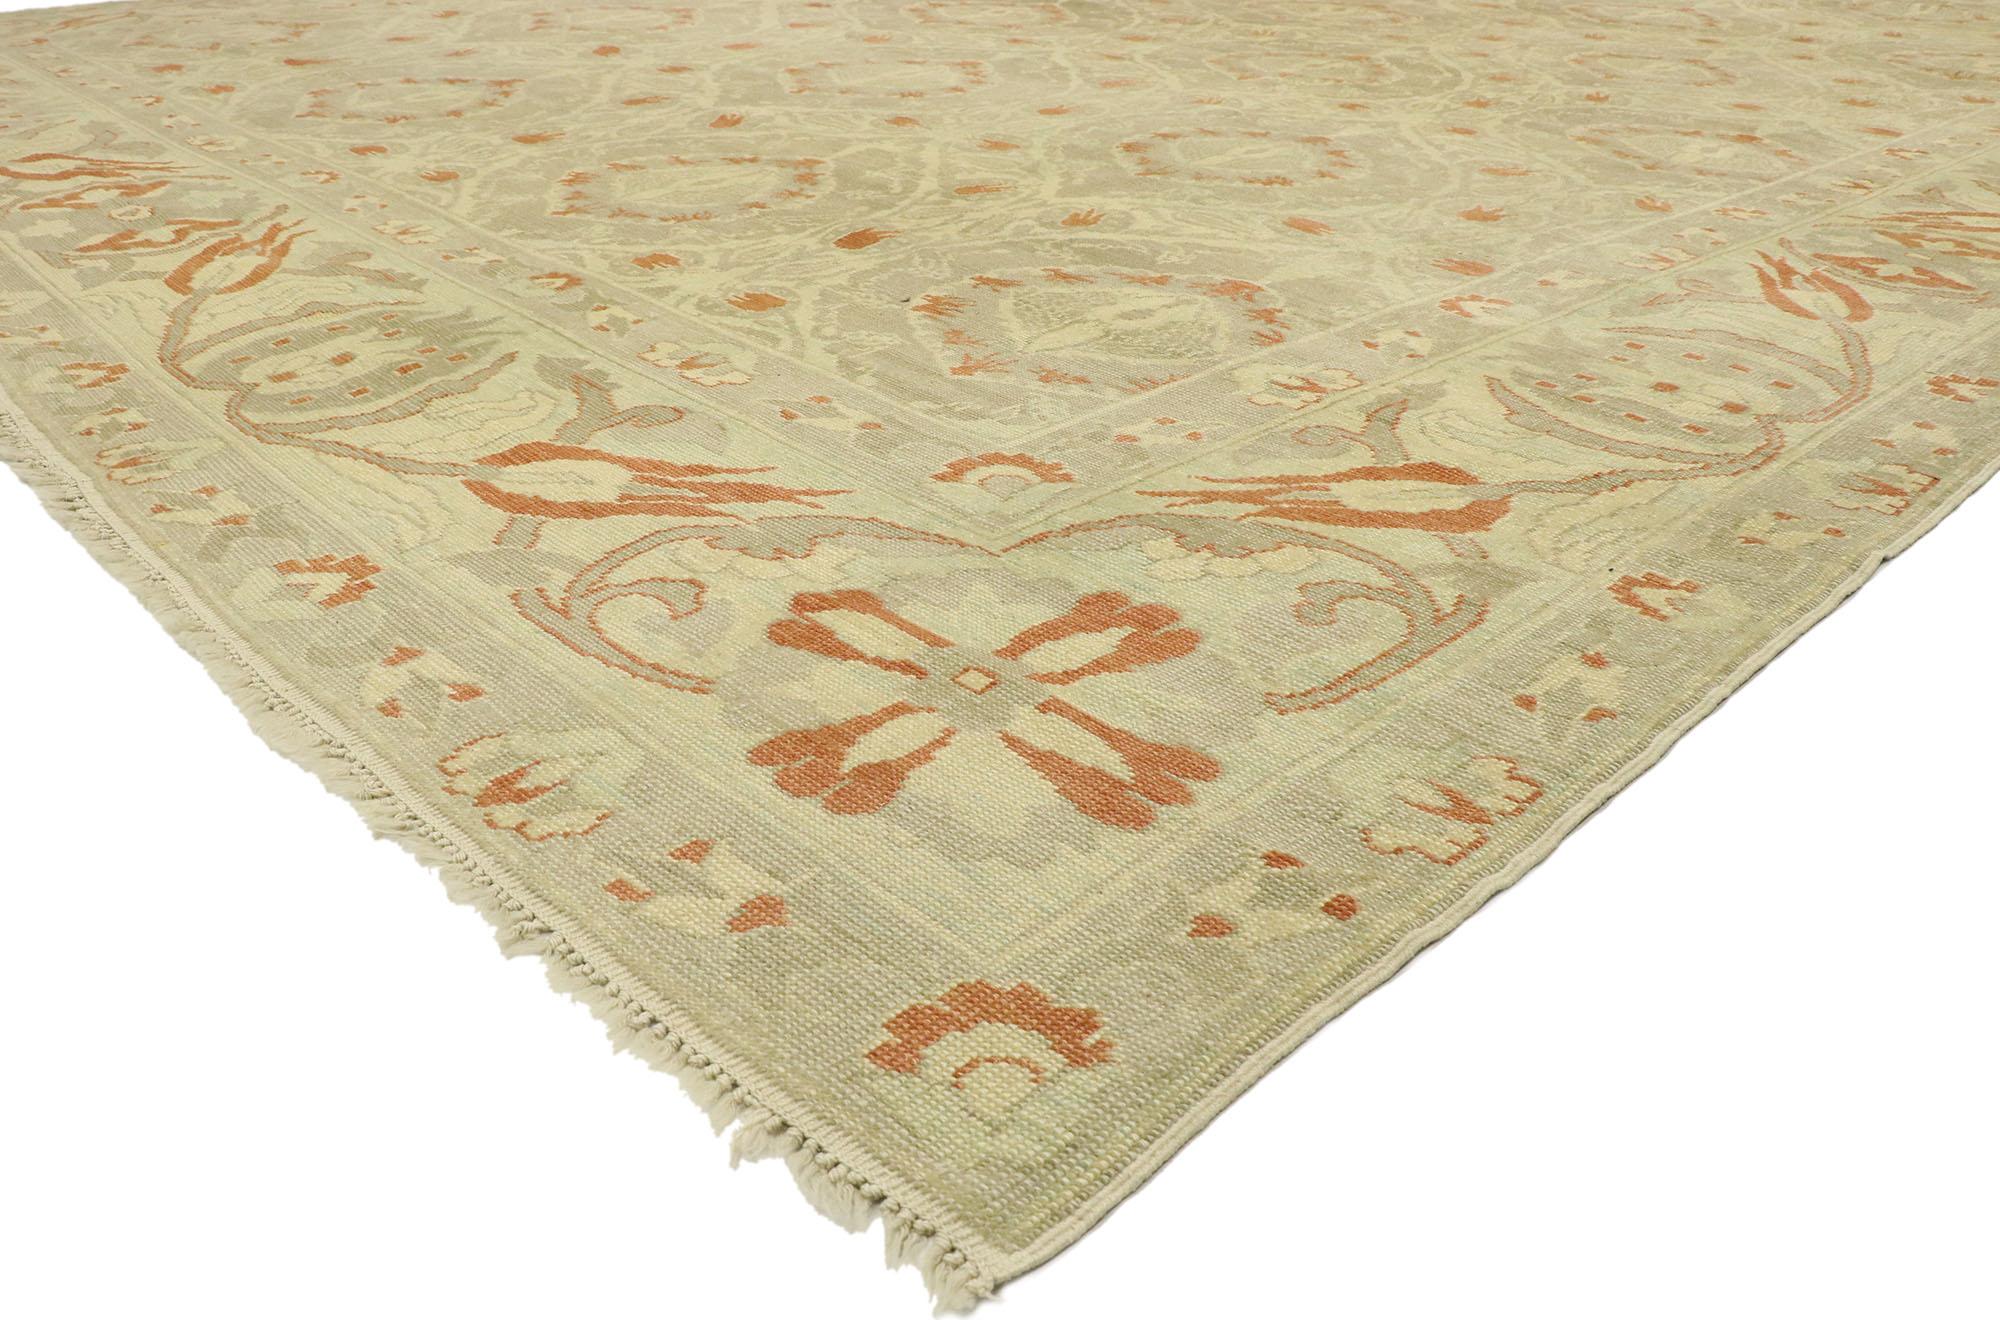 51596 new Turkish Oushak rug with Arts & Crafts style Inspired by William Morris. The architectural elements of naturalistic forms combined with Arts & Crafts style, this new Turkish Oushak rug draws inspiration from William Morris. It features an